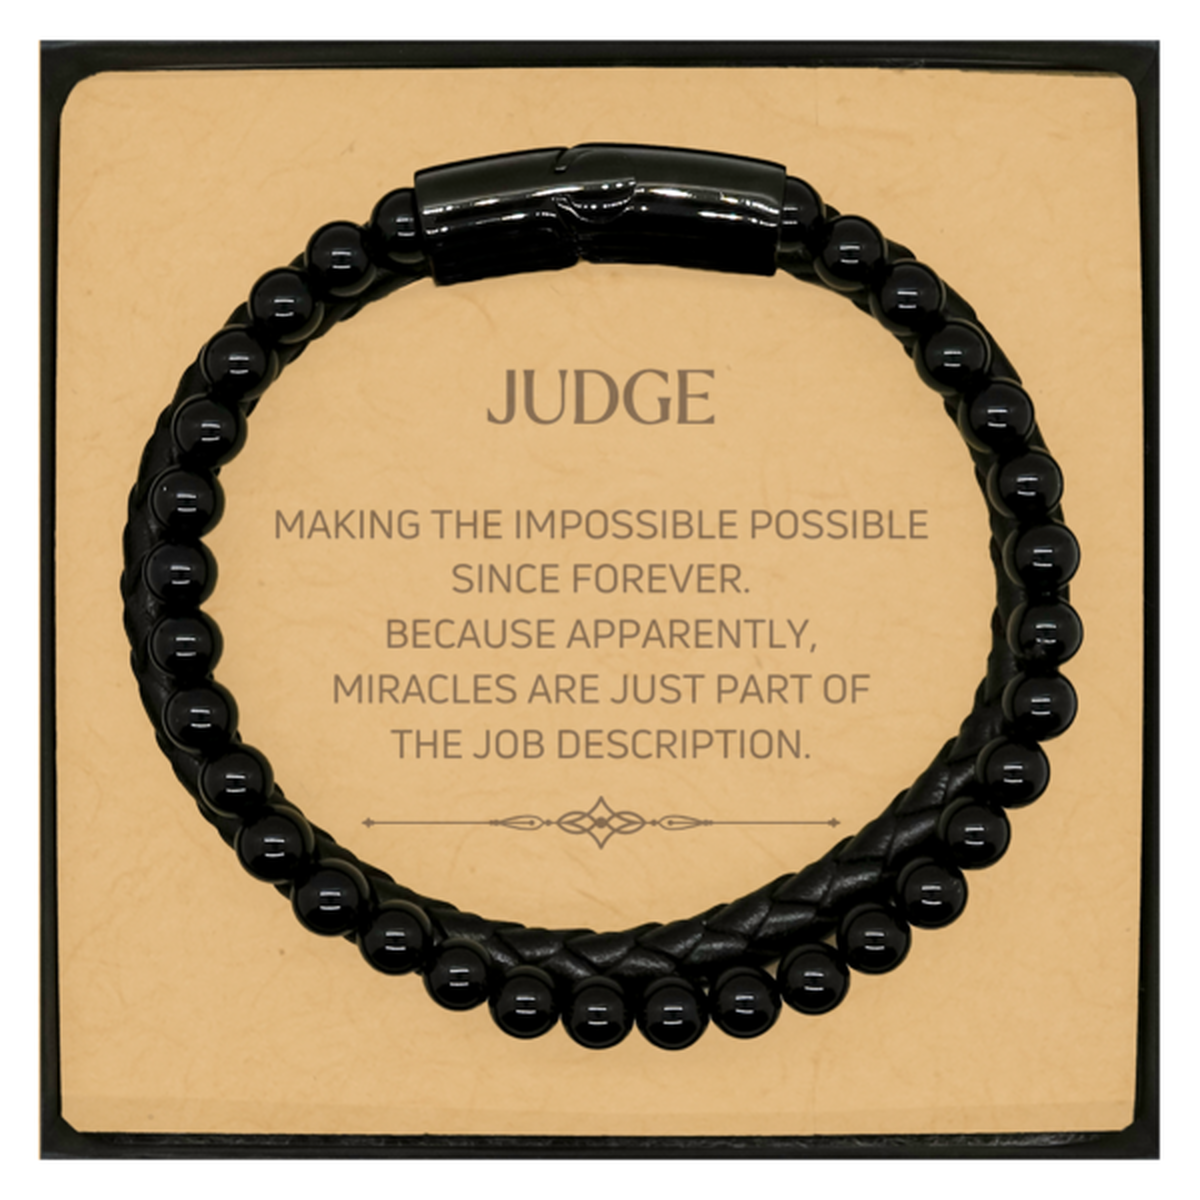 Funny Judge Gifts, Miracles are just part of the job description, Inspirational Birthday Christmas Stone Leather Bracelets For Judge, Men, Women, Coworkers, Friends, Boss